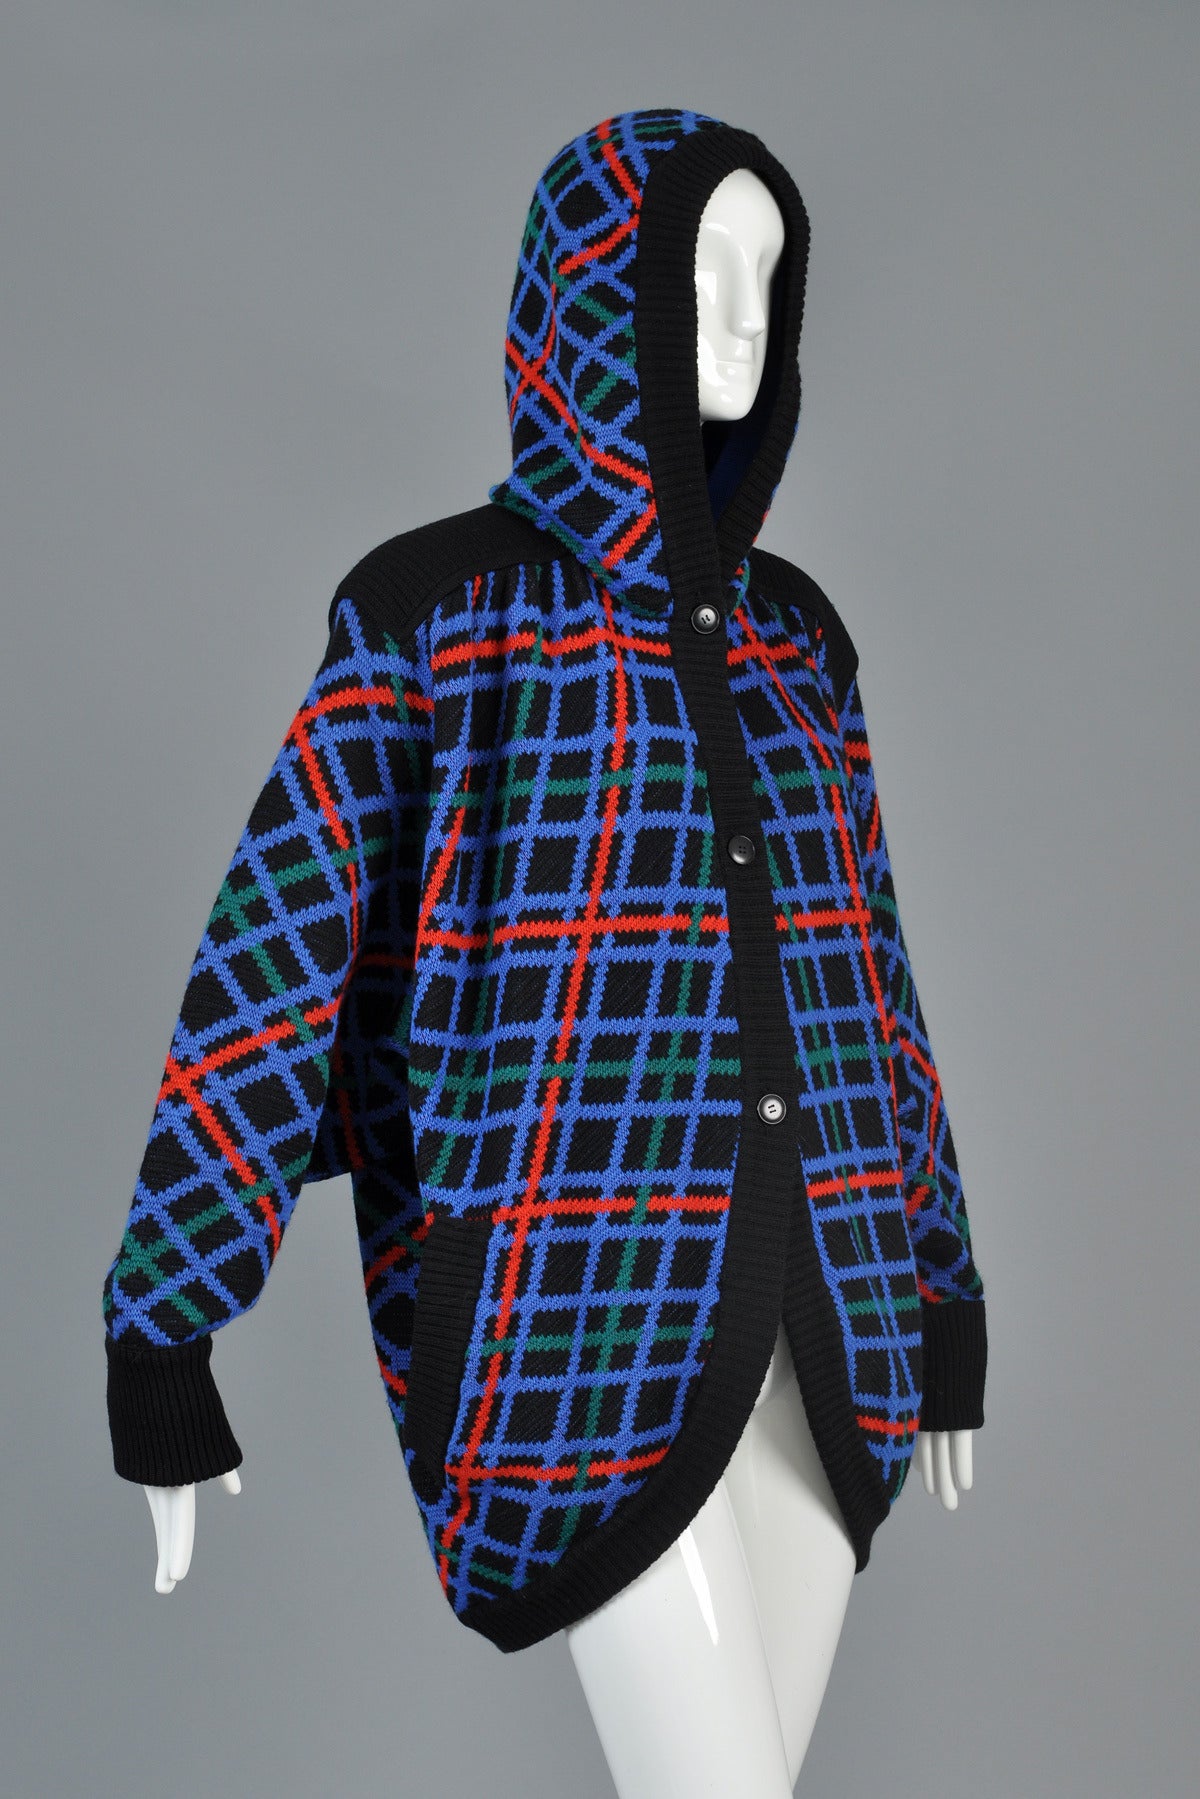 Yves Saint Laurent 1980s Plaid Hooded Knit Cocoon Jacket 3